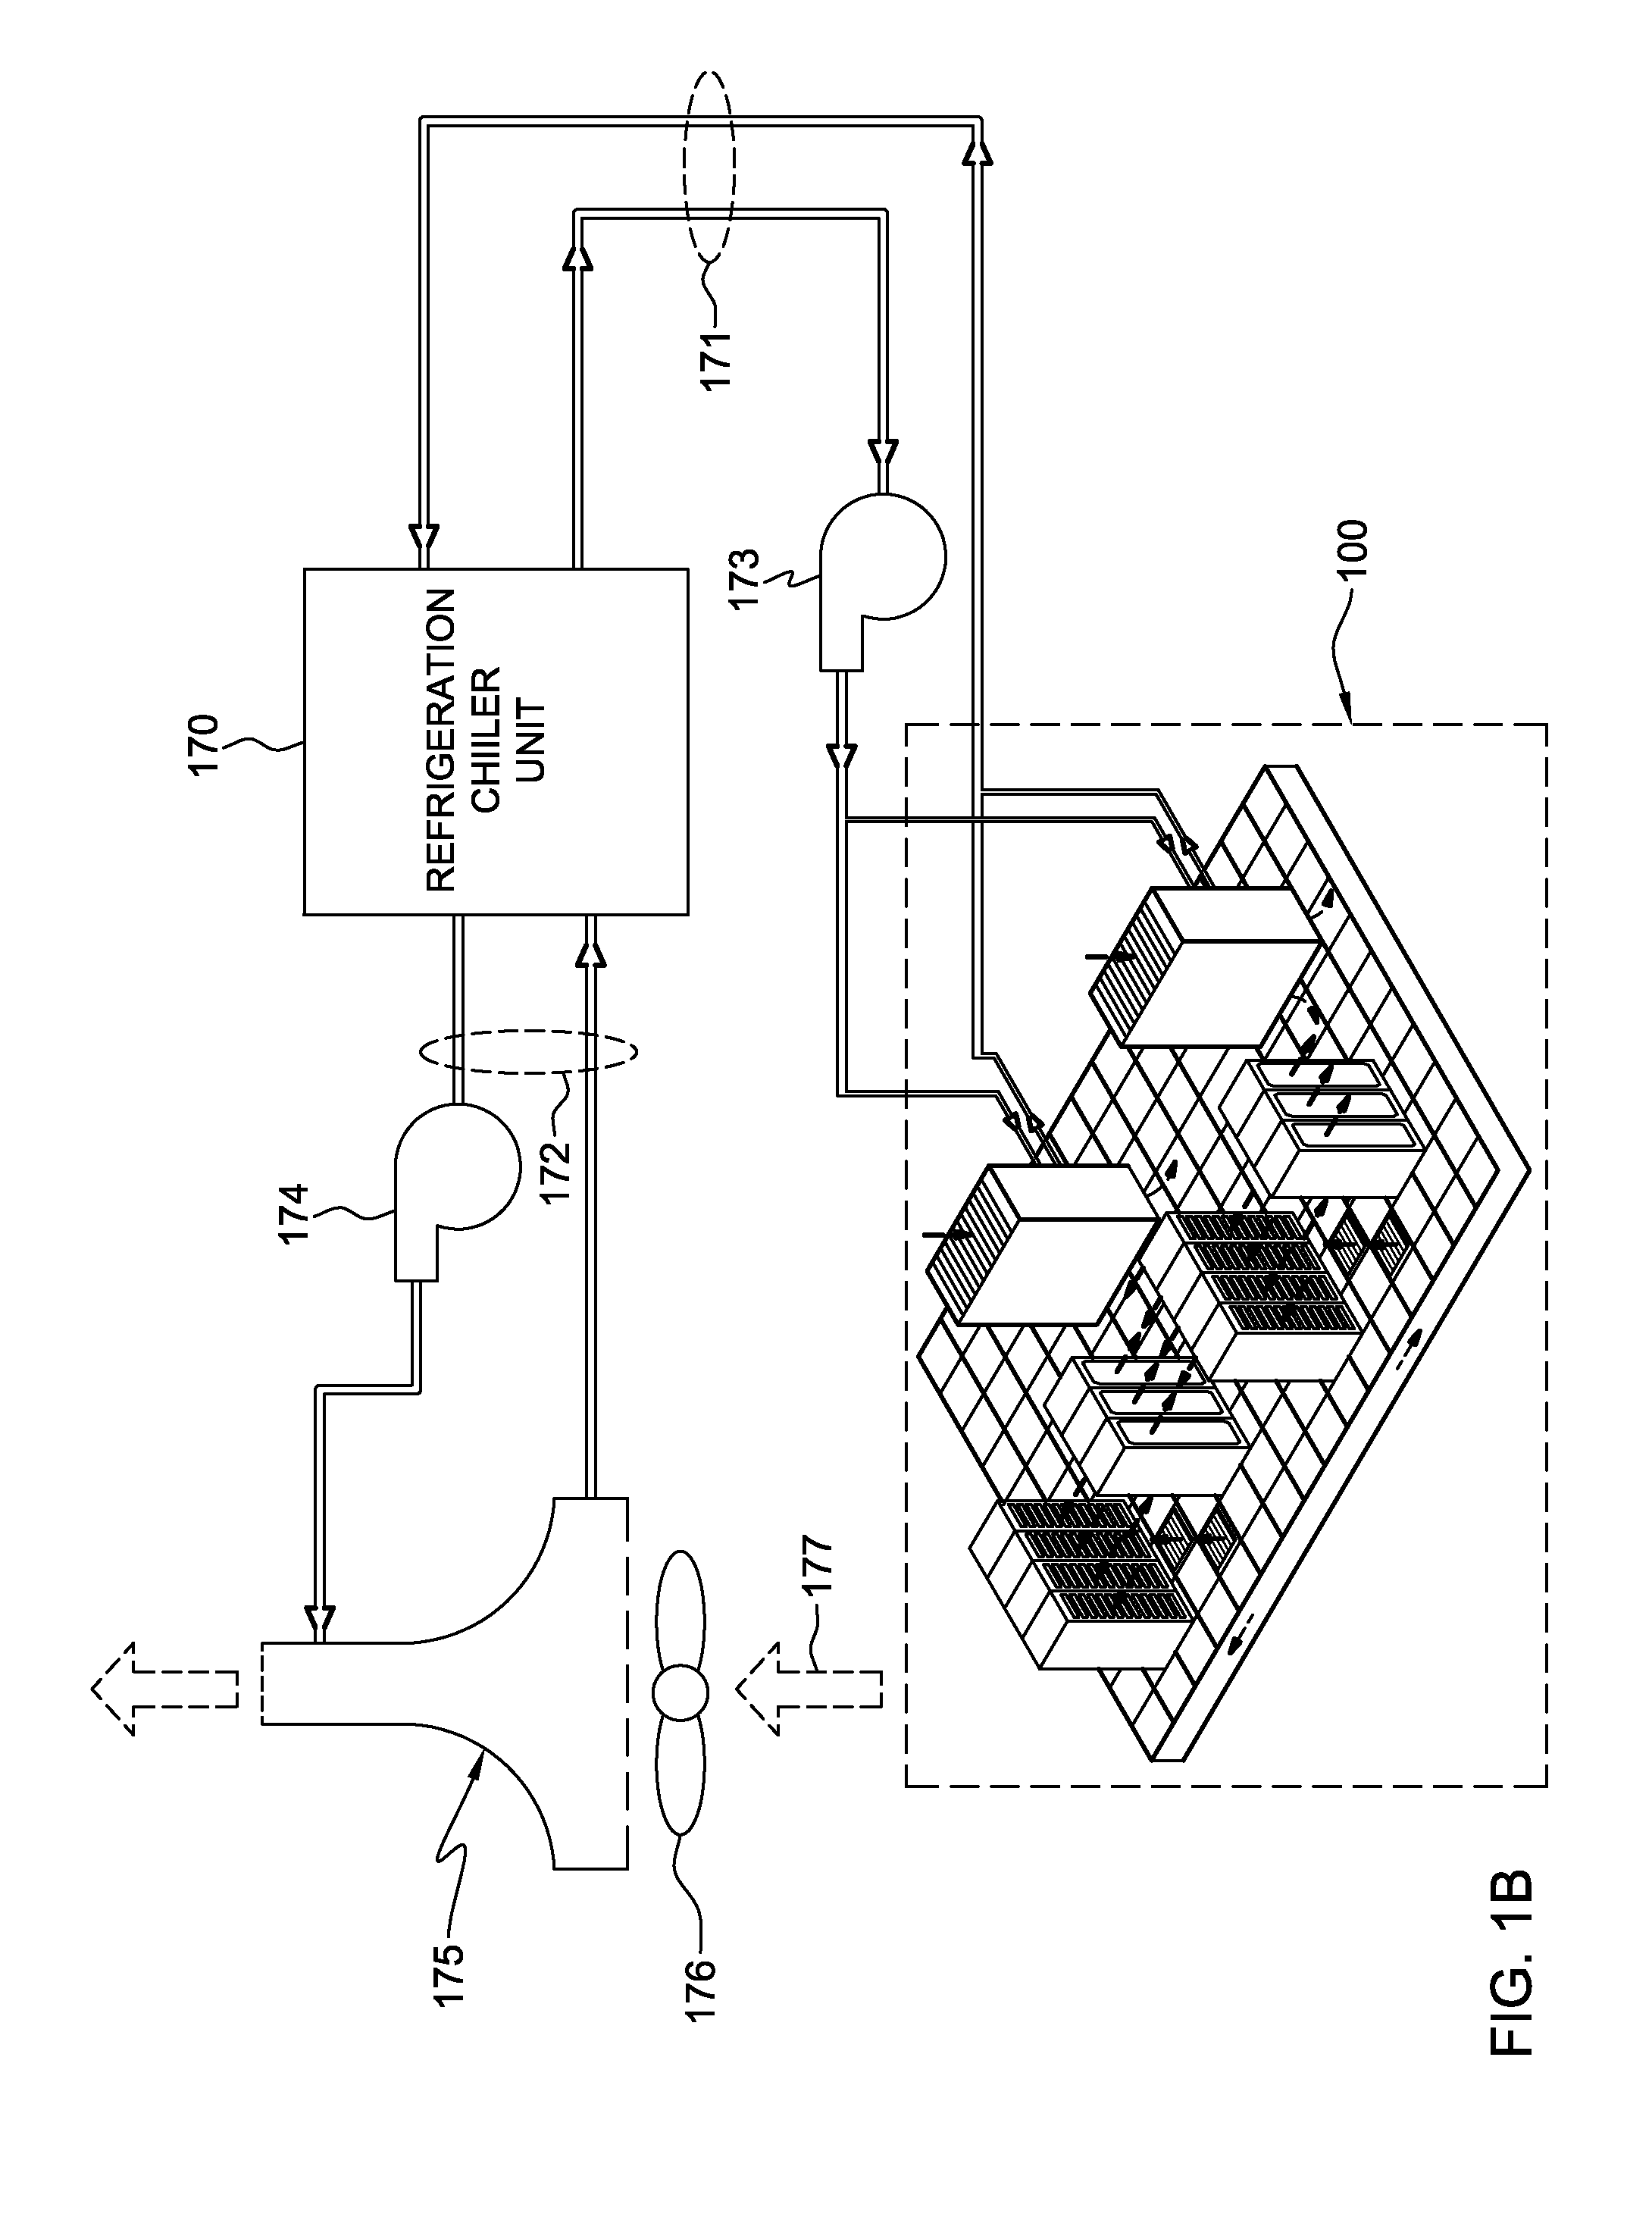 Ground-based heat sink facilitating electronic system cooling